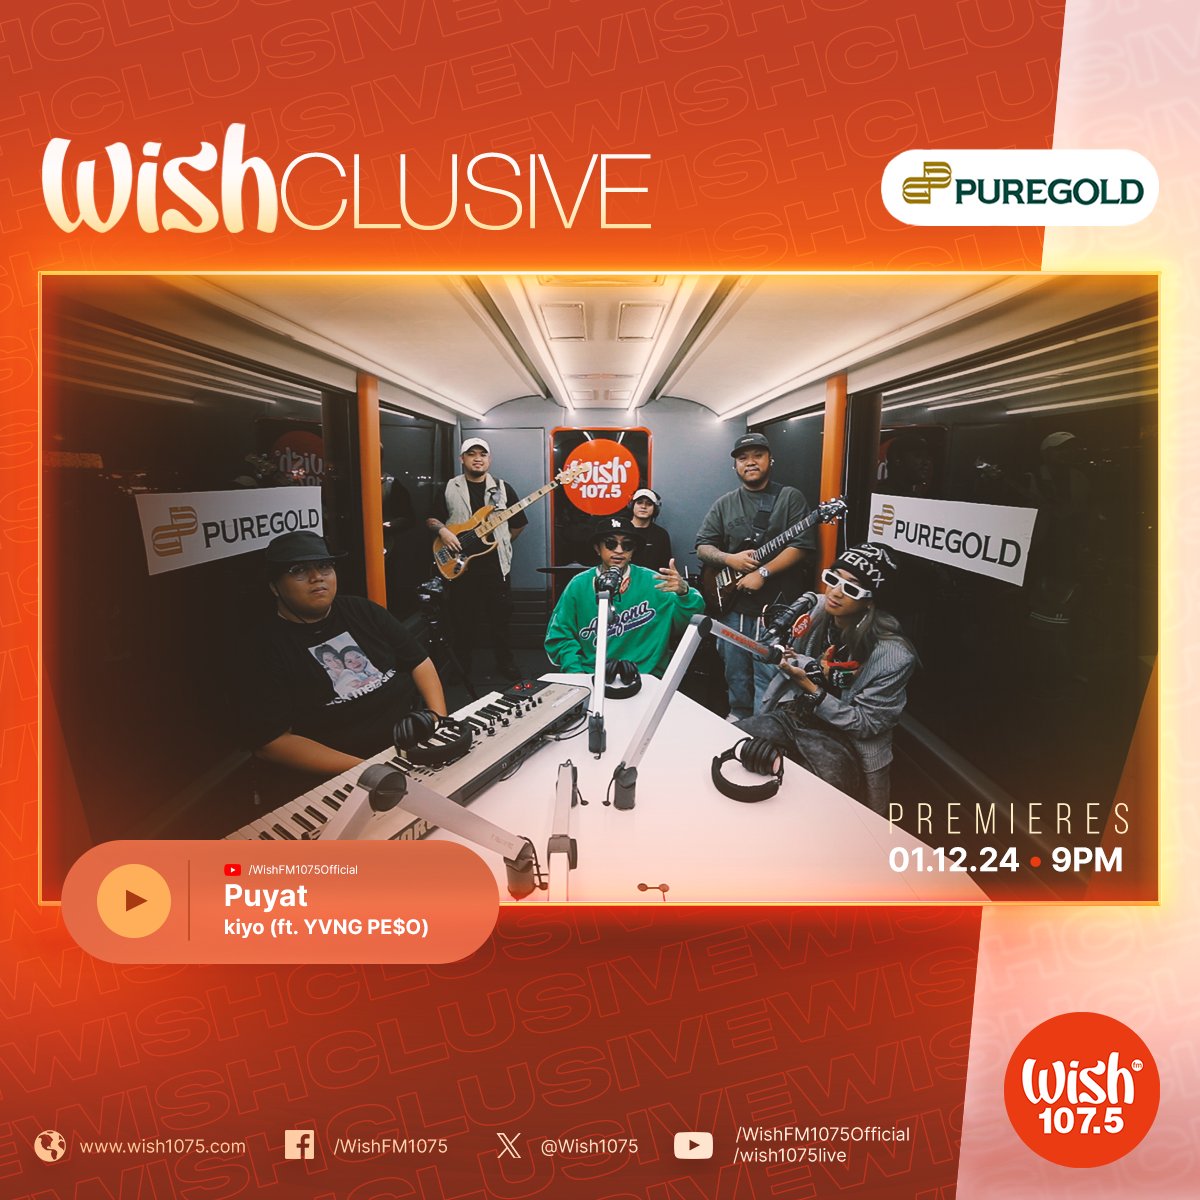 Reflecting on the challenges of fame as they grow older, @Yukihirorubio and YVNG PE$O bring their collaborative track 'Puyat' to the Wish Bus for our newest Wishclusive! Their video drops tonight on our YouTube channel! This Wishclusive is brought to you by @Puregold_PH.